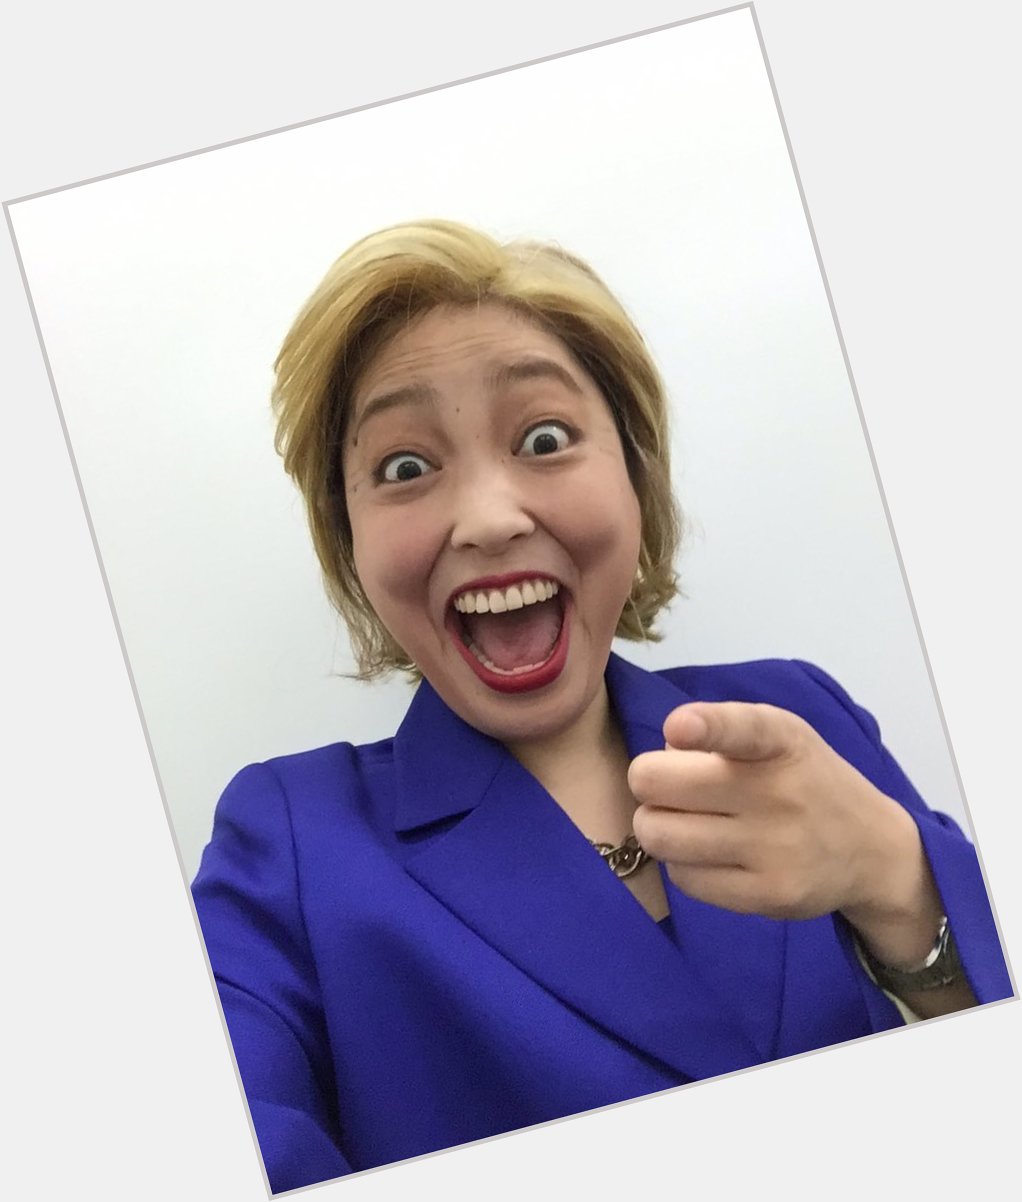  Happy birthday Hillary Clinton! Hope you\re having a great day! From your Japanese impersonator 